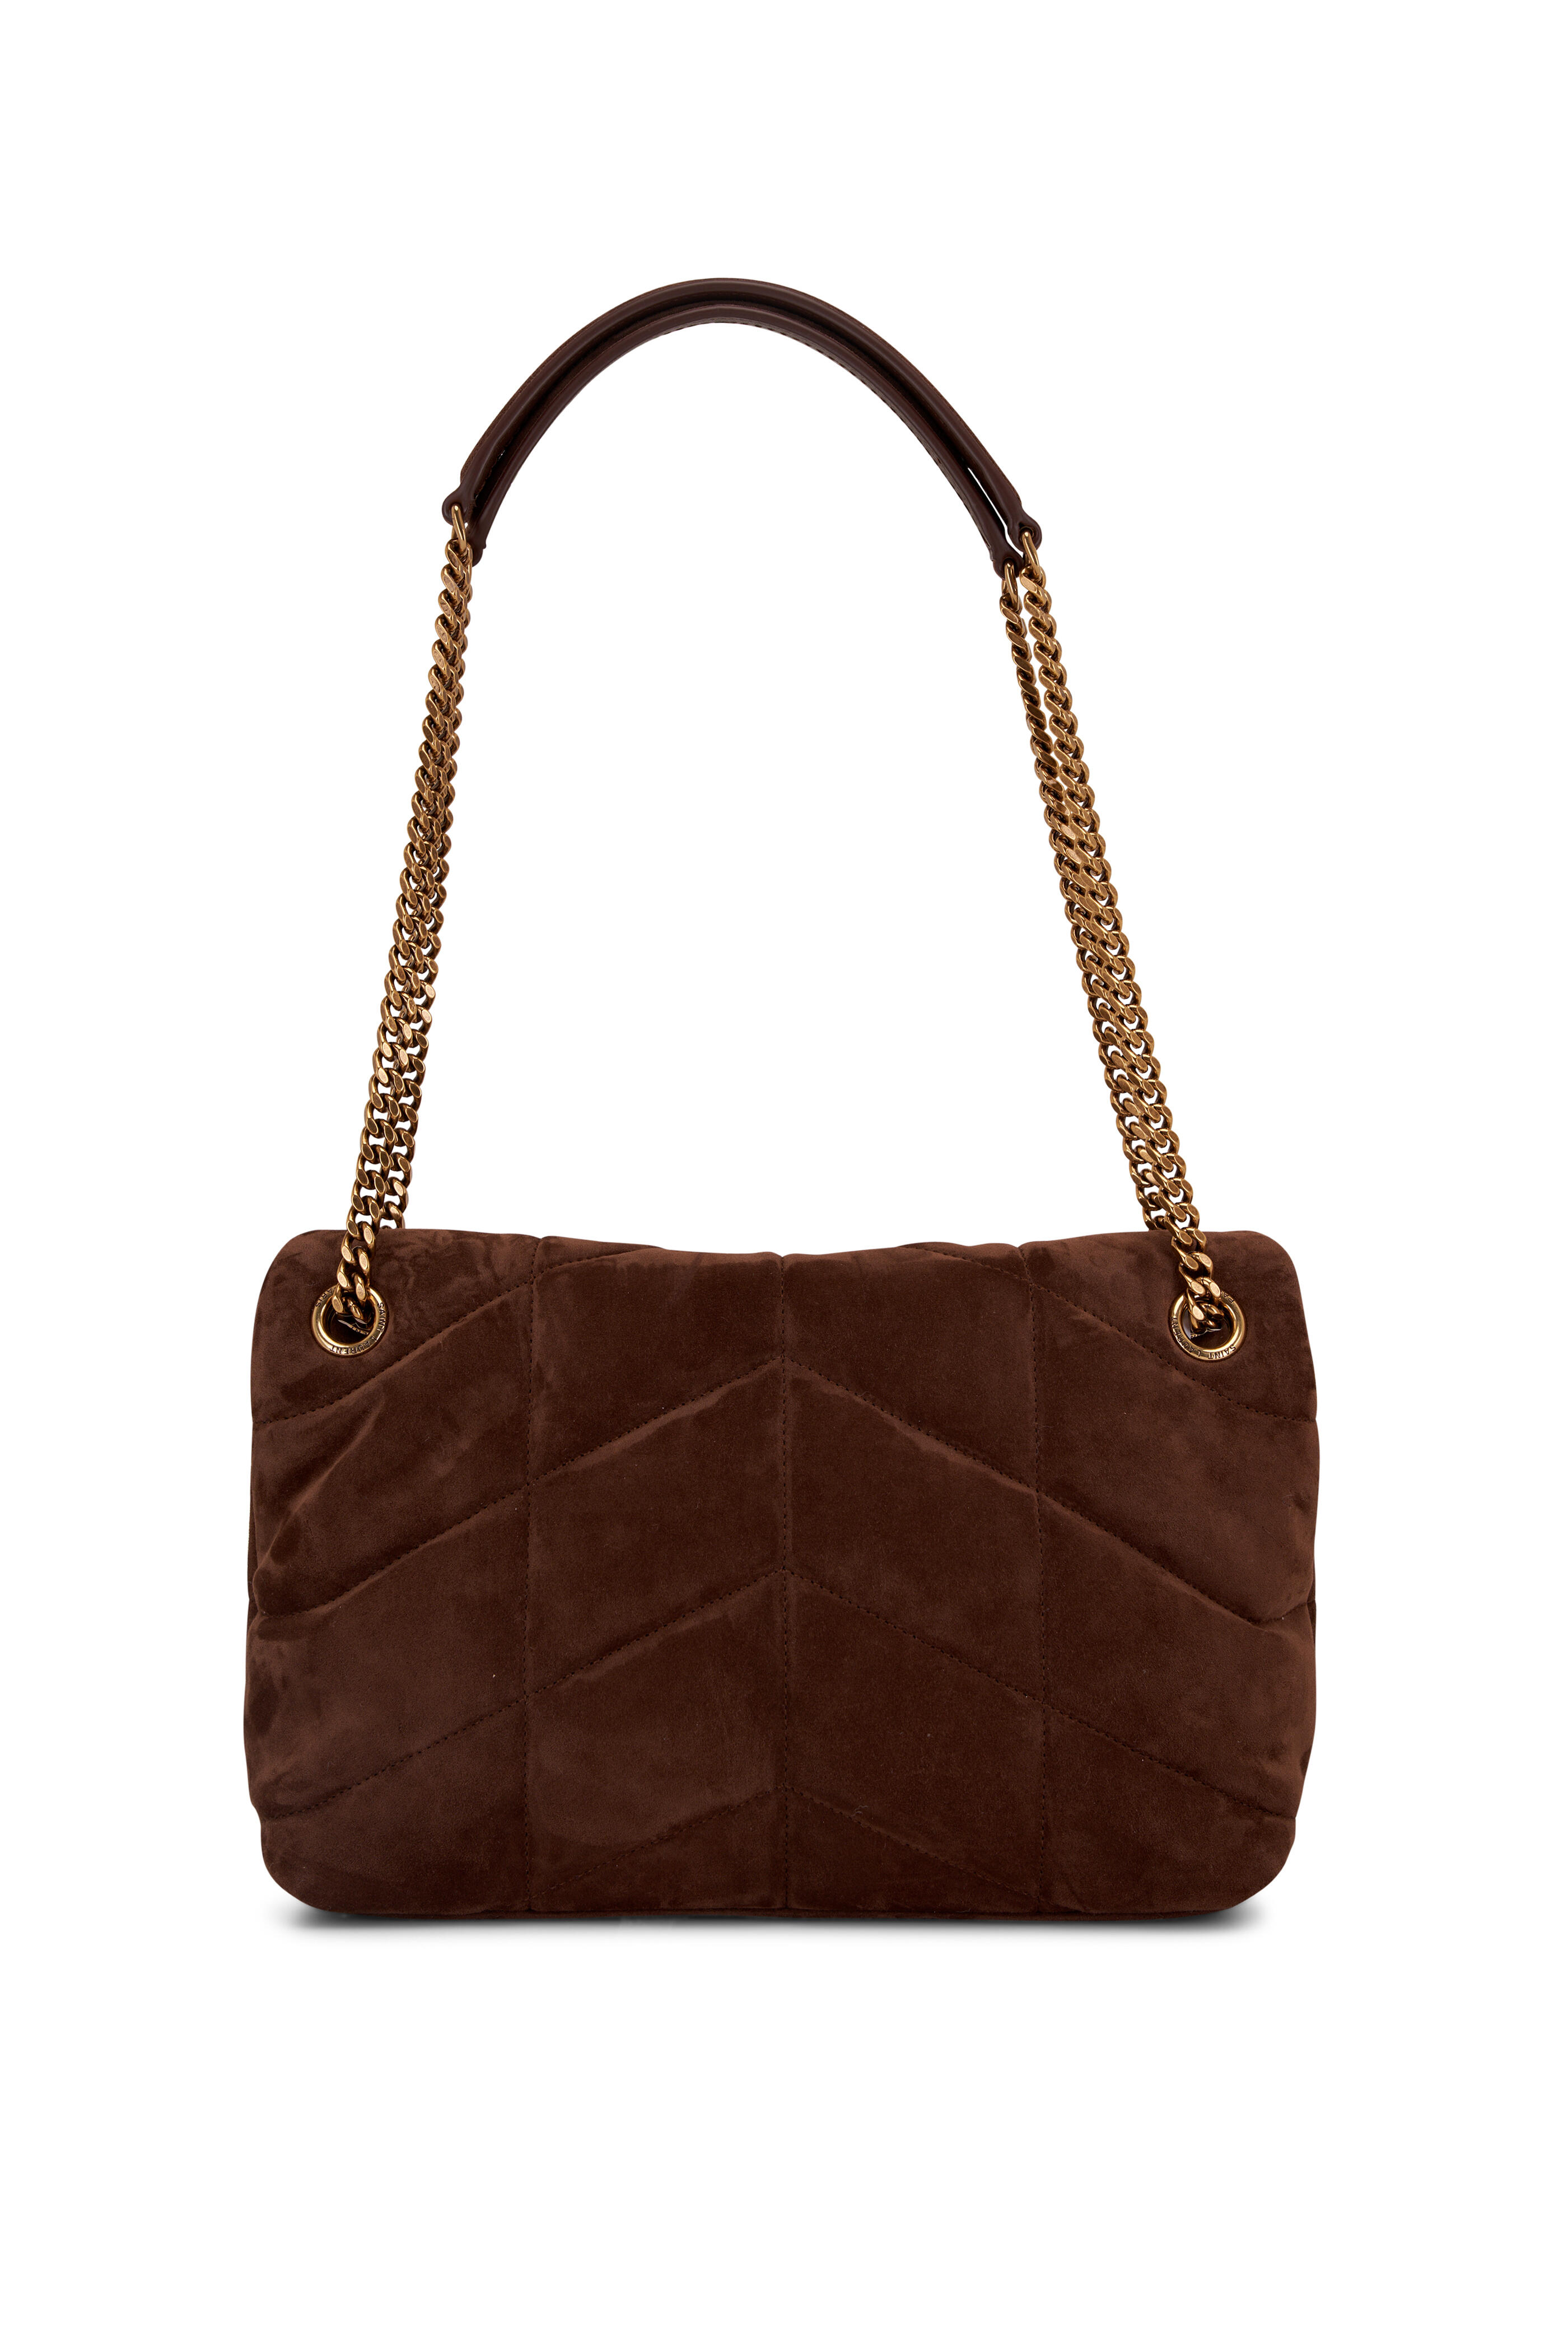 Bag Flap w/Magnetic Button - Brown/Bronze, Accessories